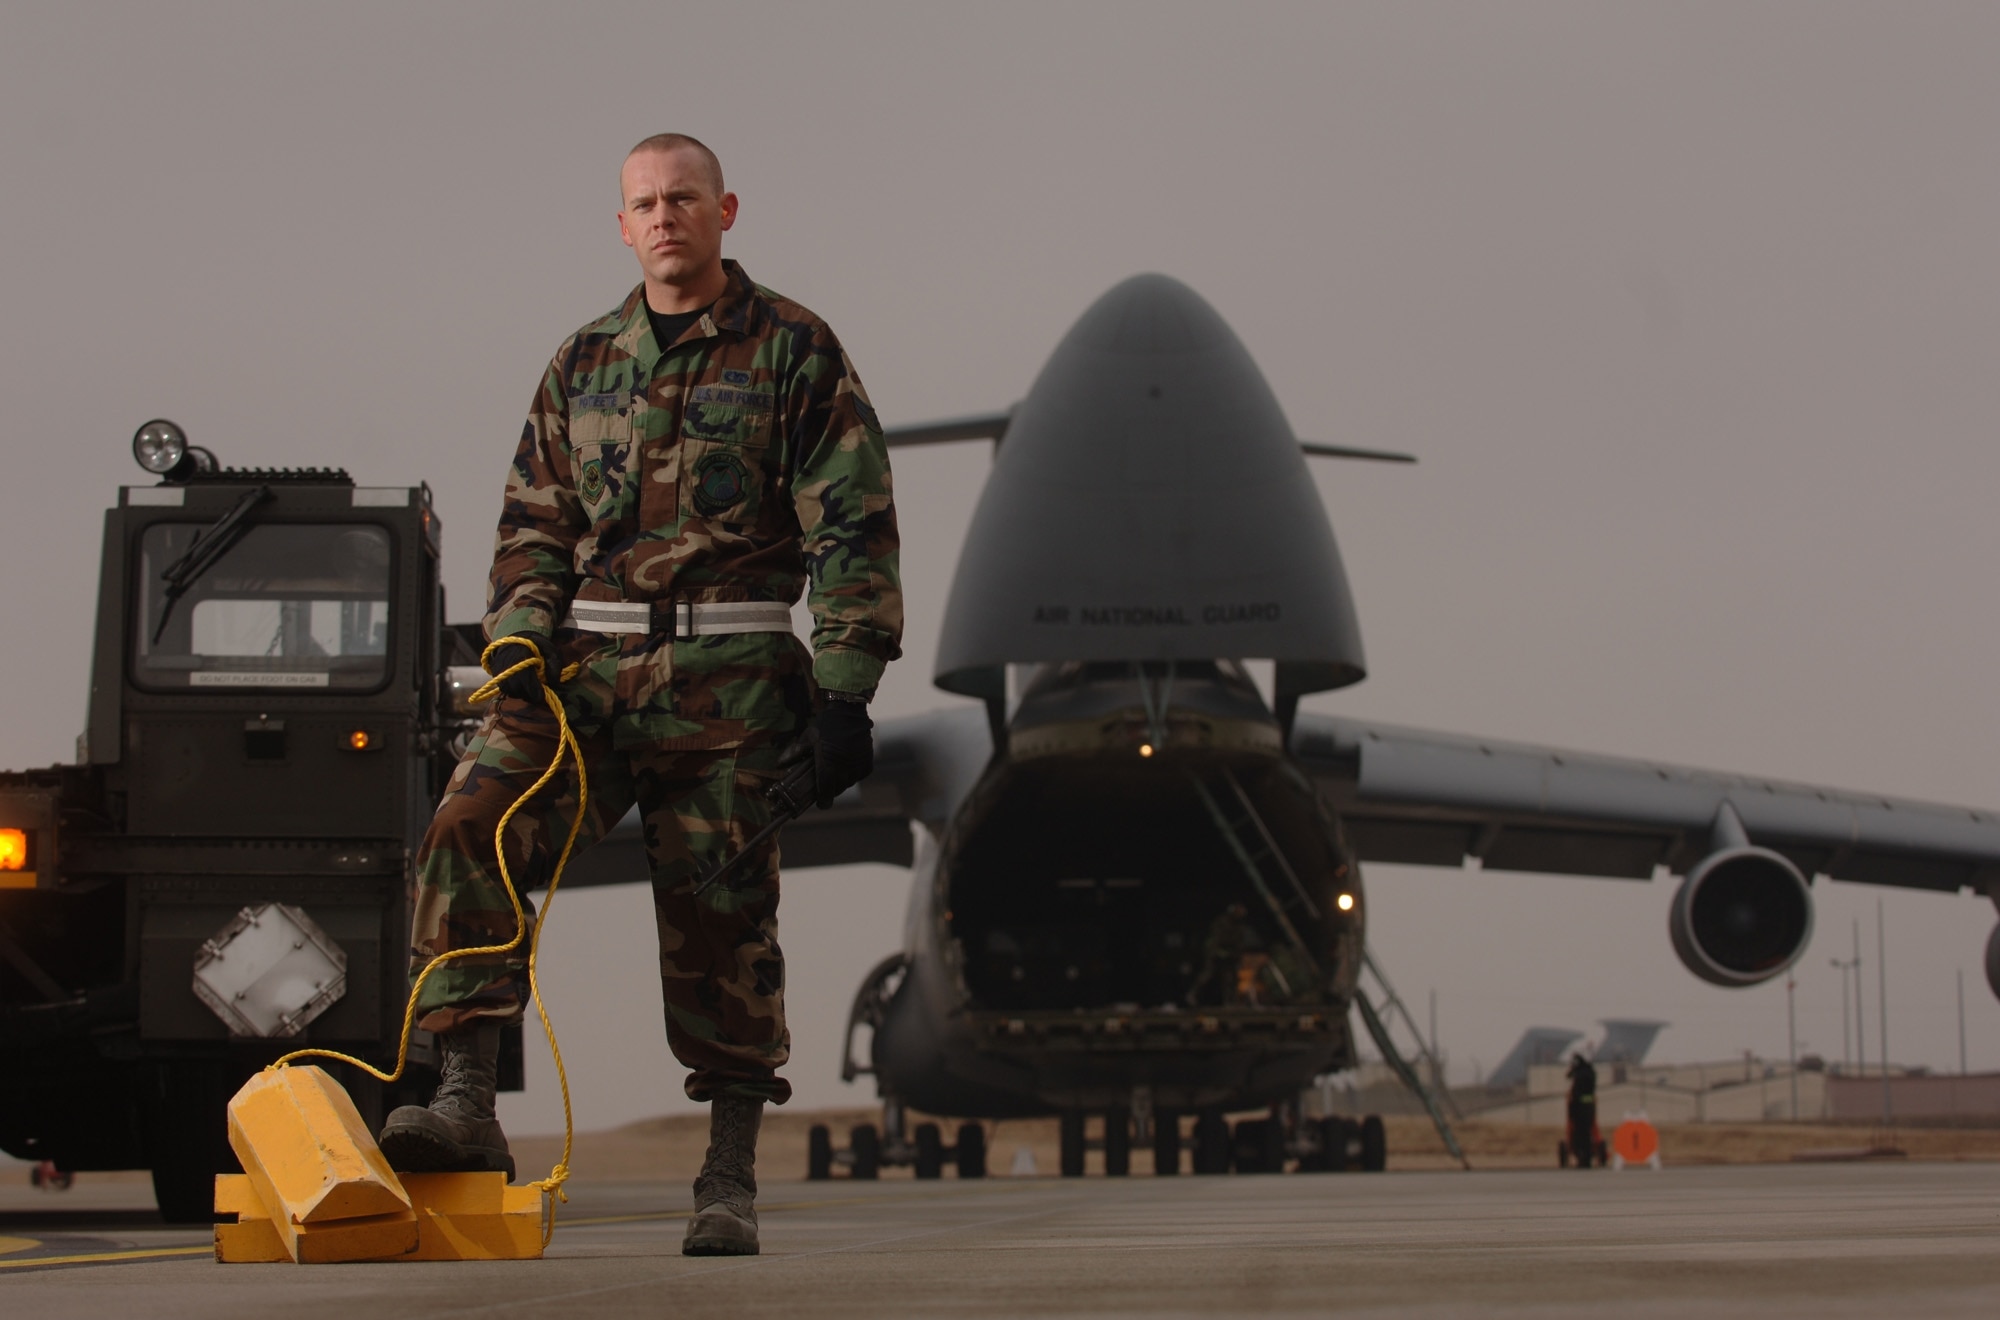 SPANGDAHLEM AIR BASE, Germany -- Air Transportation specialist, Senior Airman Jason Poteete and a 60K loader stand on the hot cargo pad here ready to service a C-5 Galaxy returning from down range with explosive cargo. Airman Poteete is assigned to the 726th Air Mobility Squadron. (U.S. Air Force photo/Master Sgt. Scott Wagers)